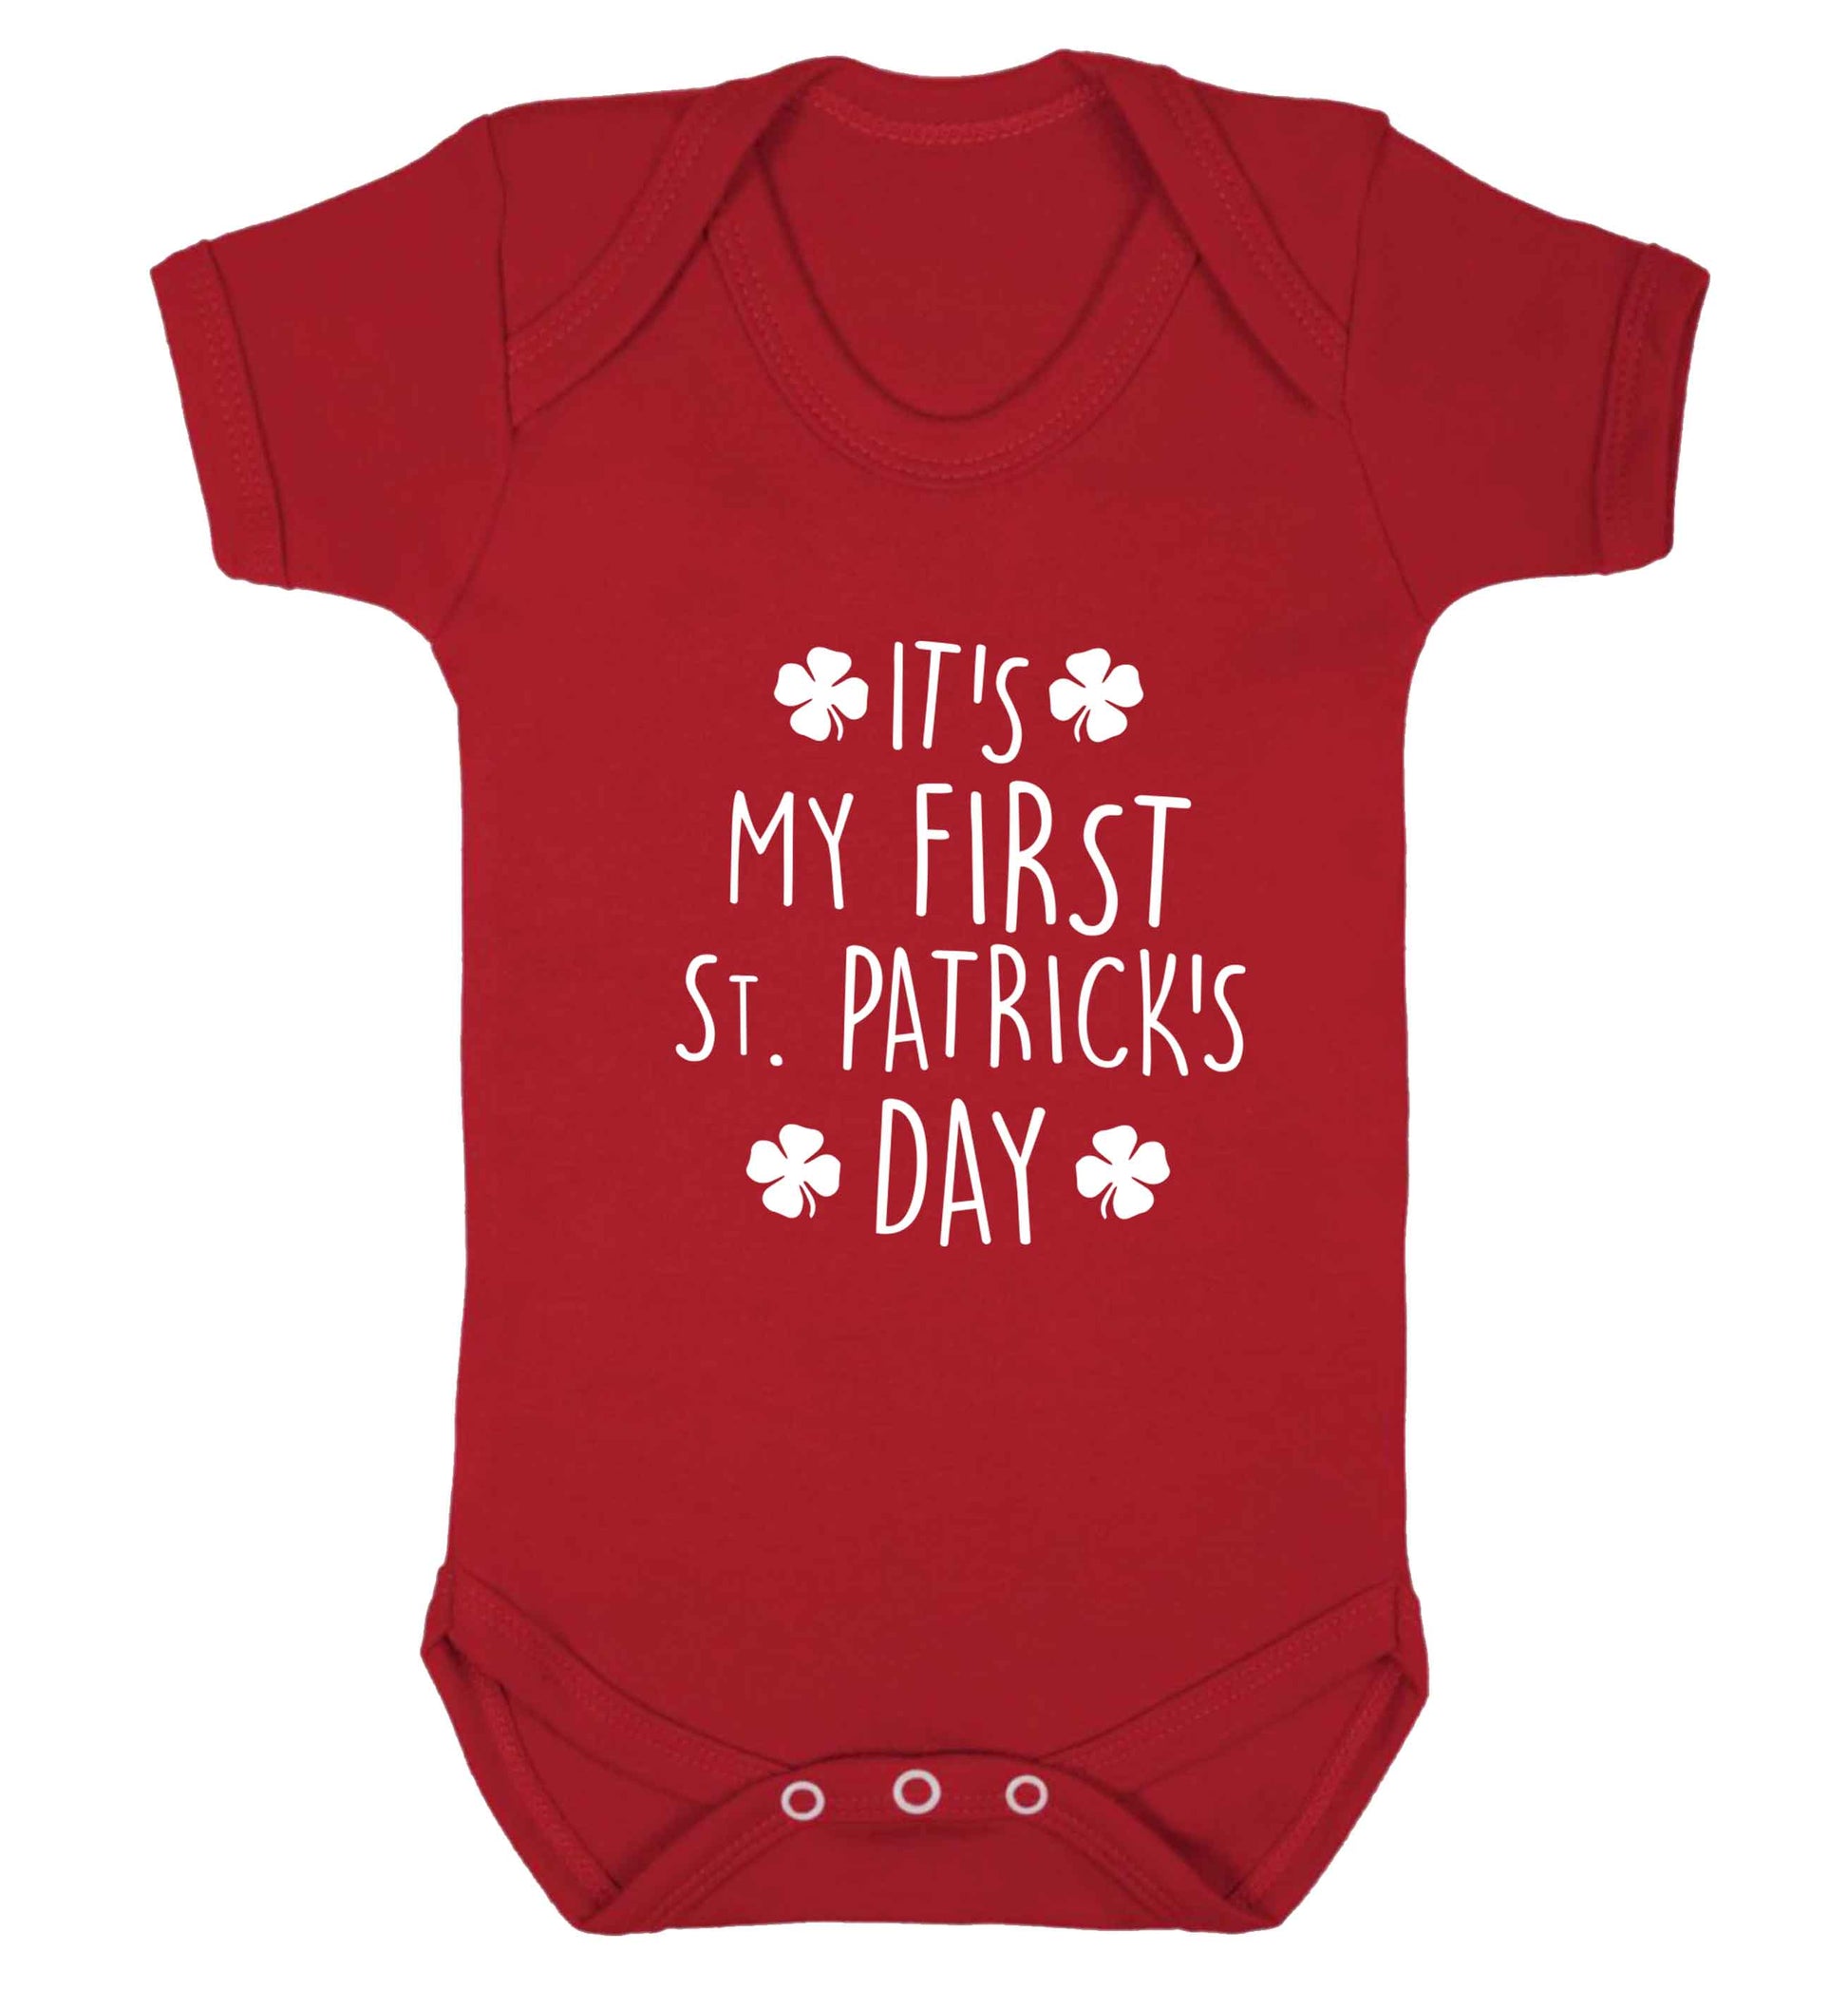 It's my first St.Patrick's day baby vest red 18-24 months